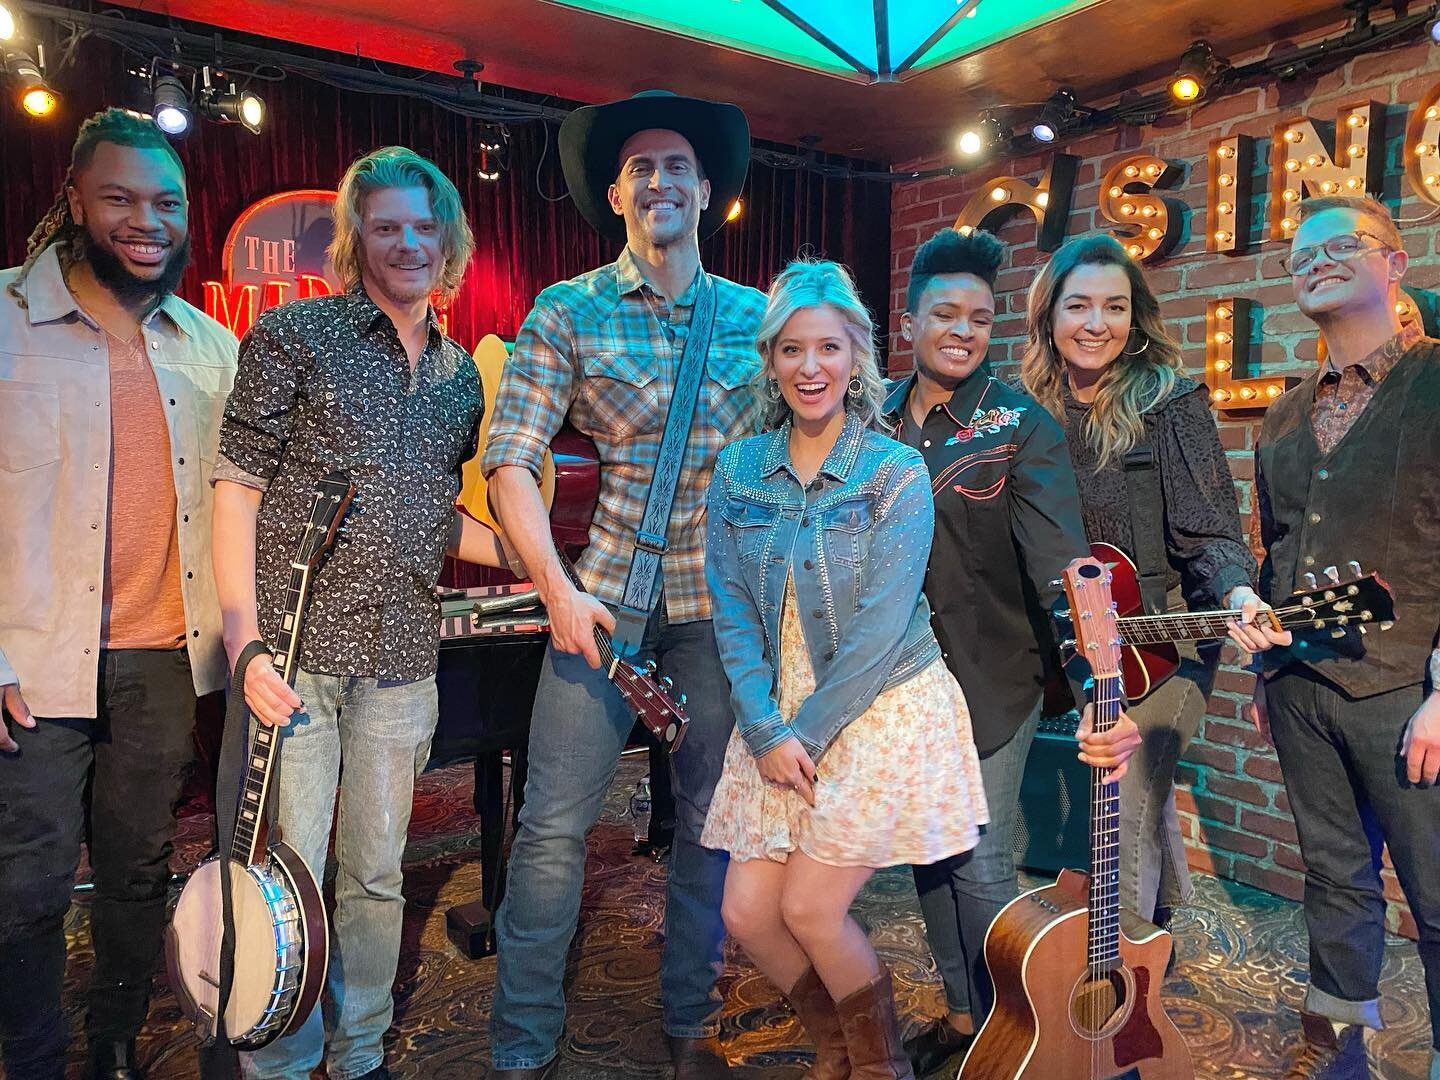 Made my sitcom debut last week 😆 on @callmekatfox &ldquo;playing&rdquo; banjo with a fun band led by @mrcheyennejackson @margiemays. Everyone on set was very cool and the band is back together for the season finale tonight!